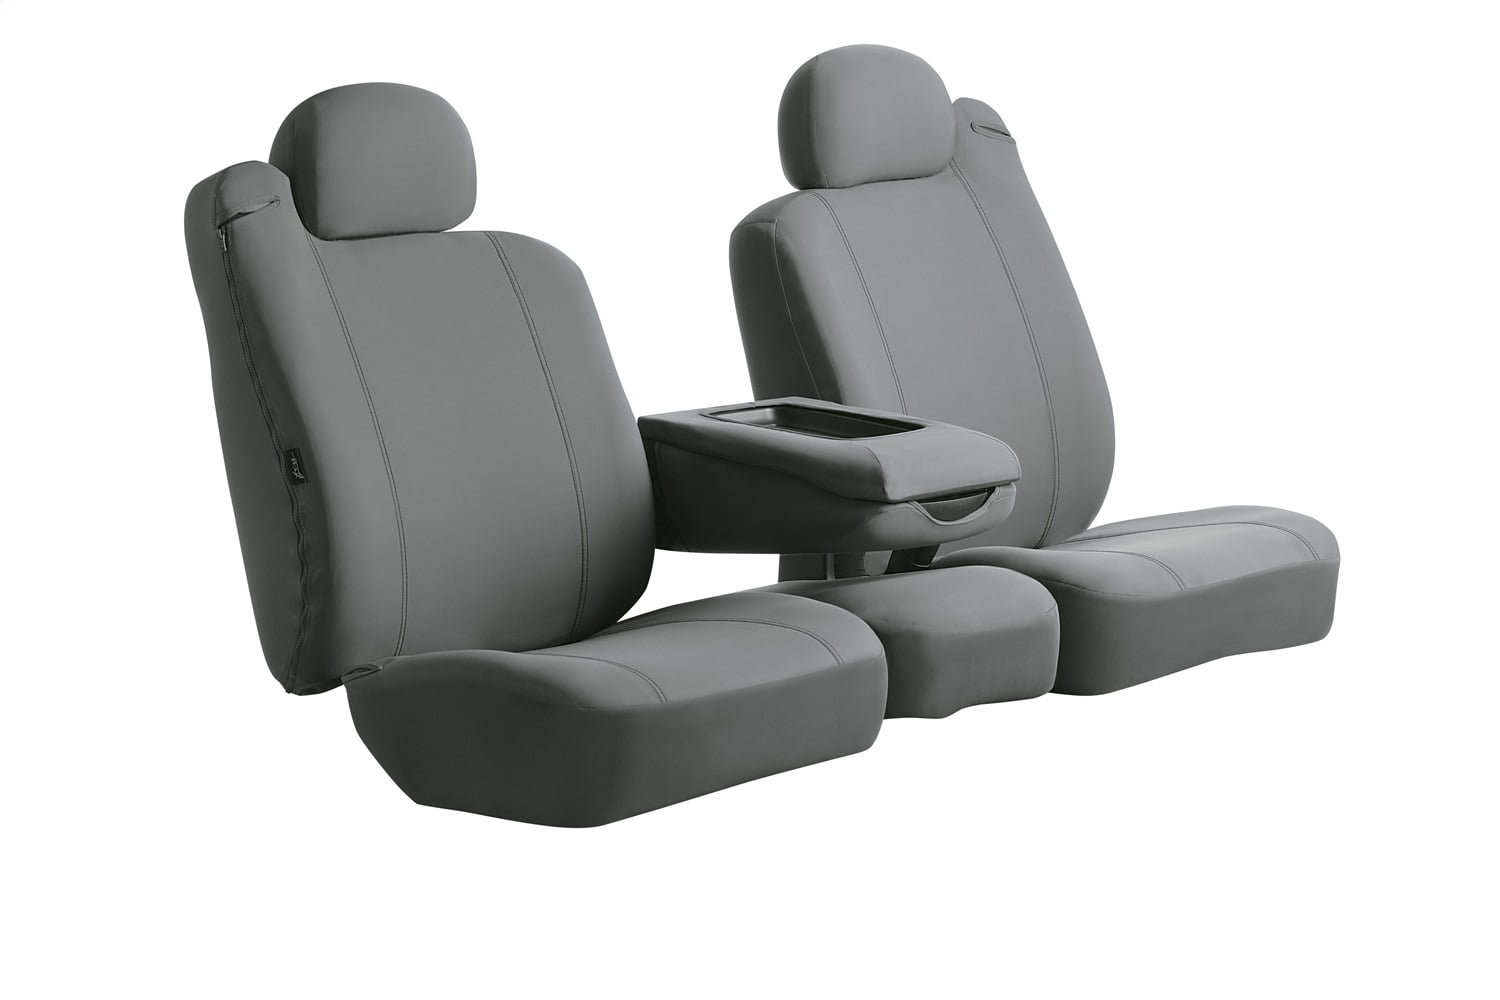 Seat Cover-SEL Front FIA SP88-16 GRAY